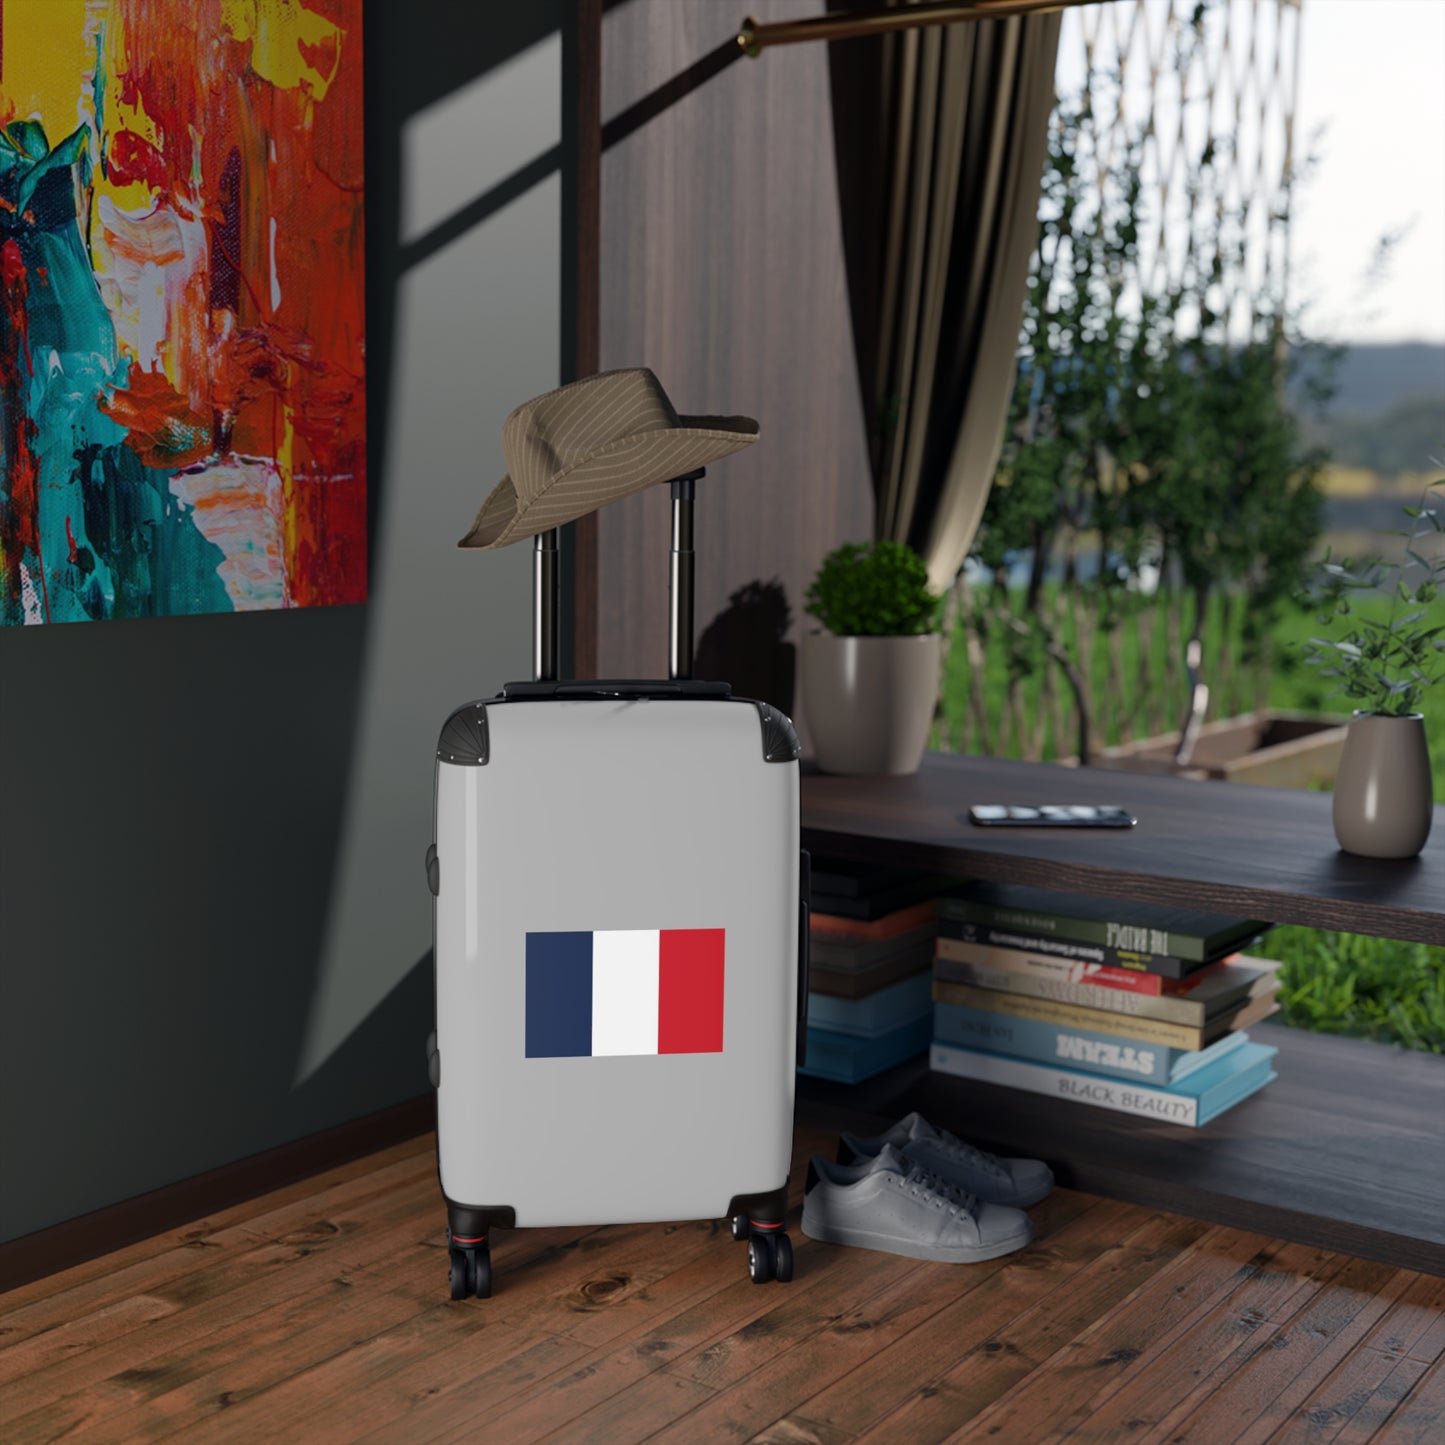 French Flag Suitcase